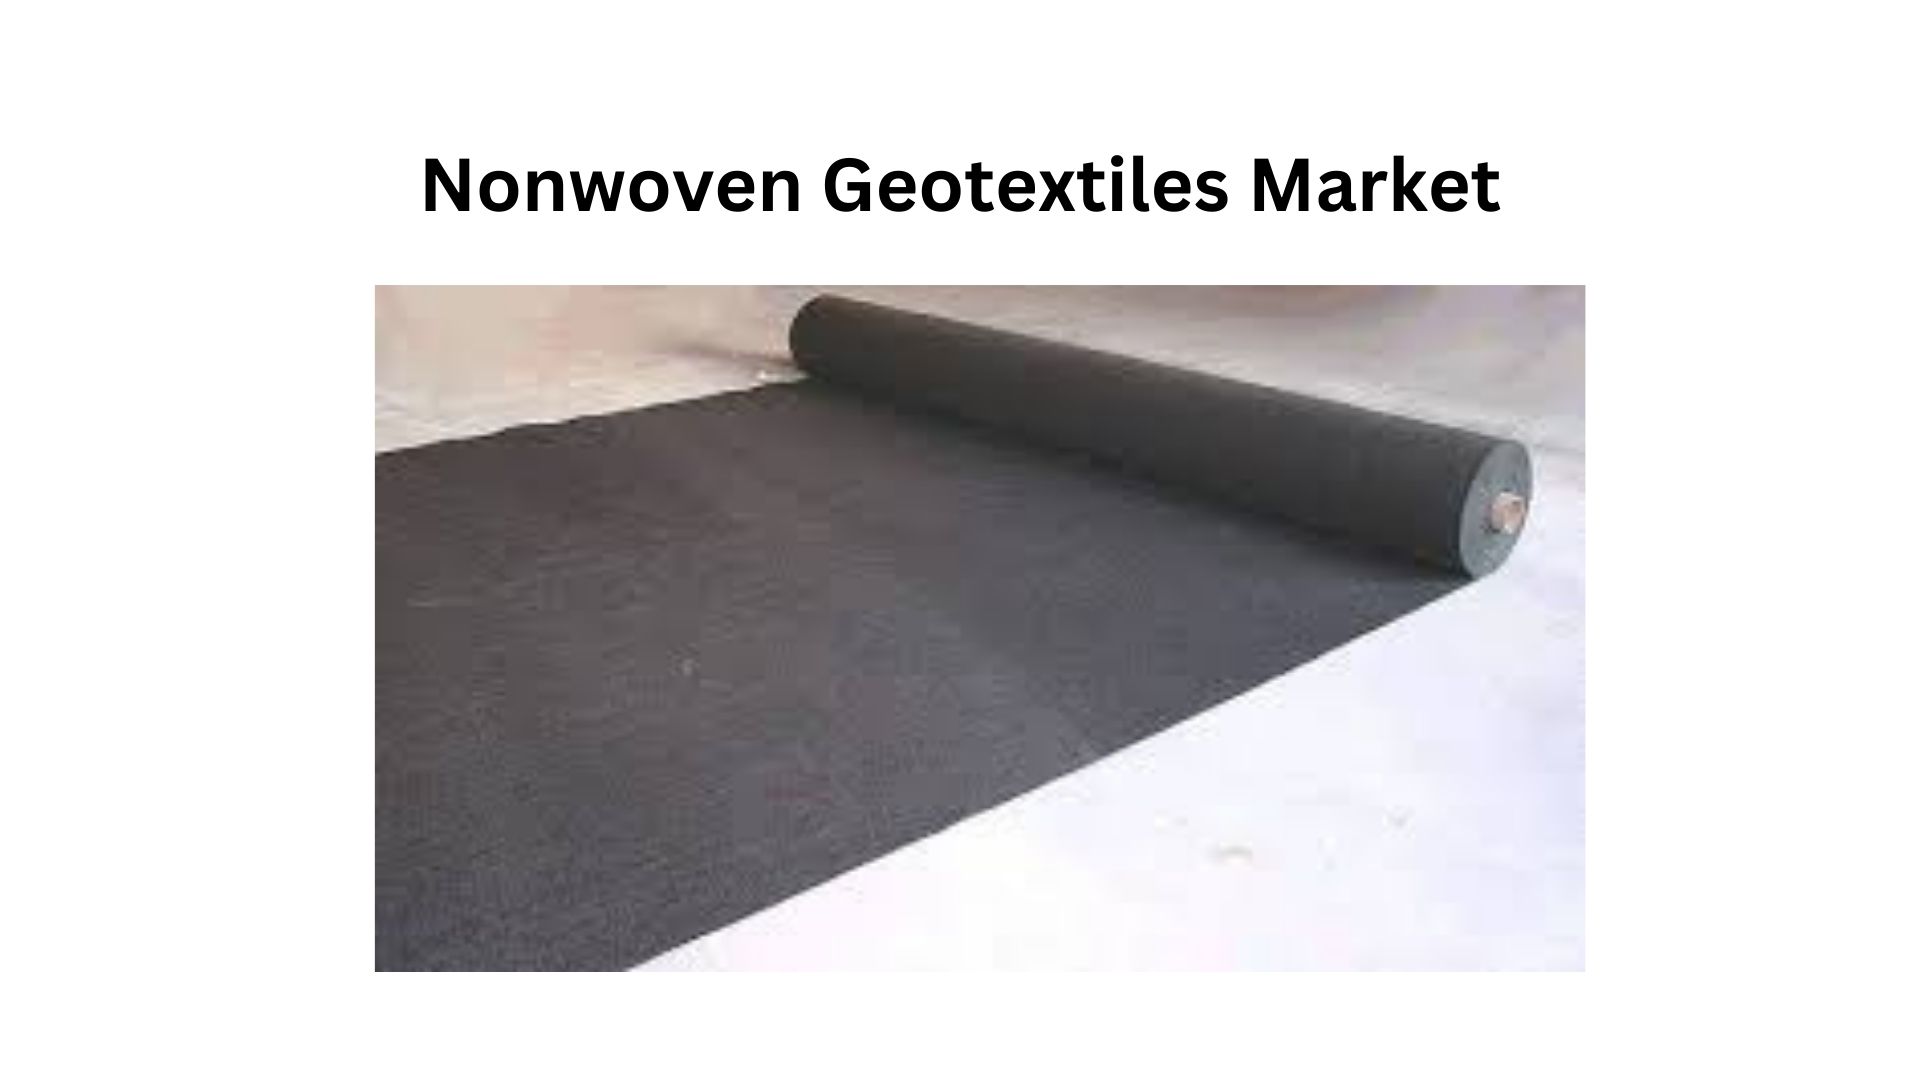 Nonwoven Geotextiles Market is expected to reach USD 9.0 Bn by 2033 | CAGR of 6.7%